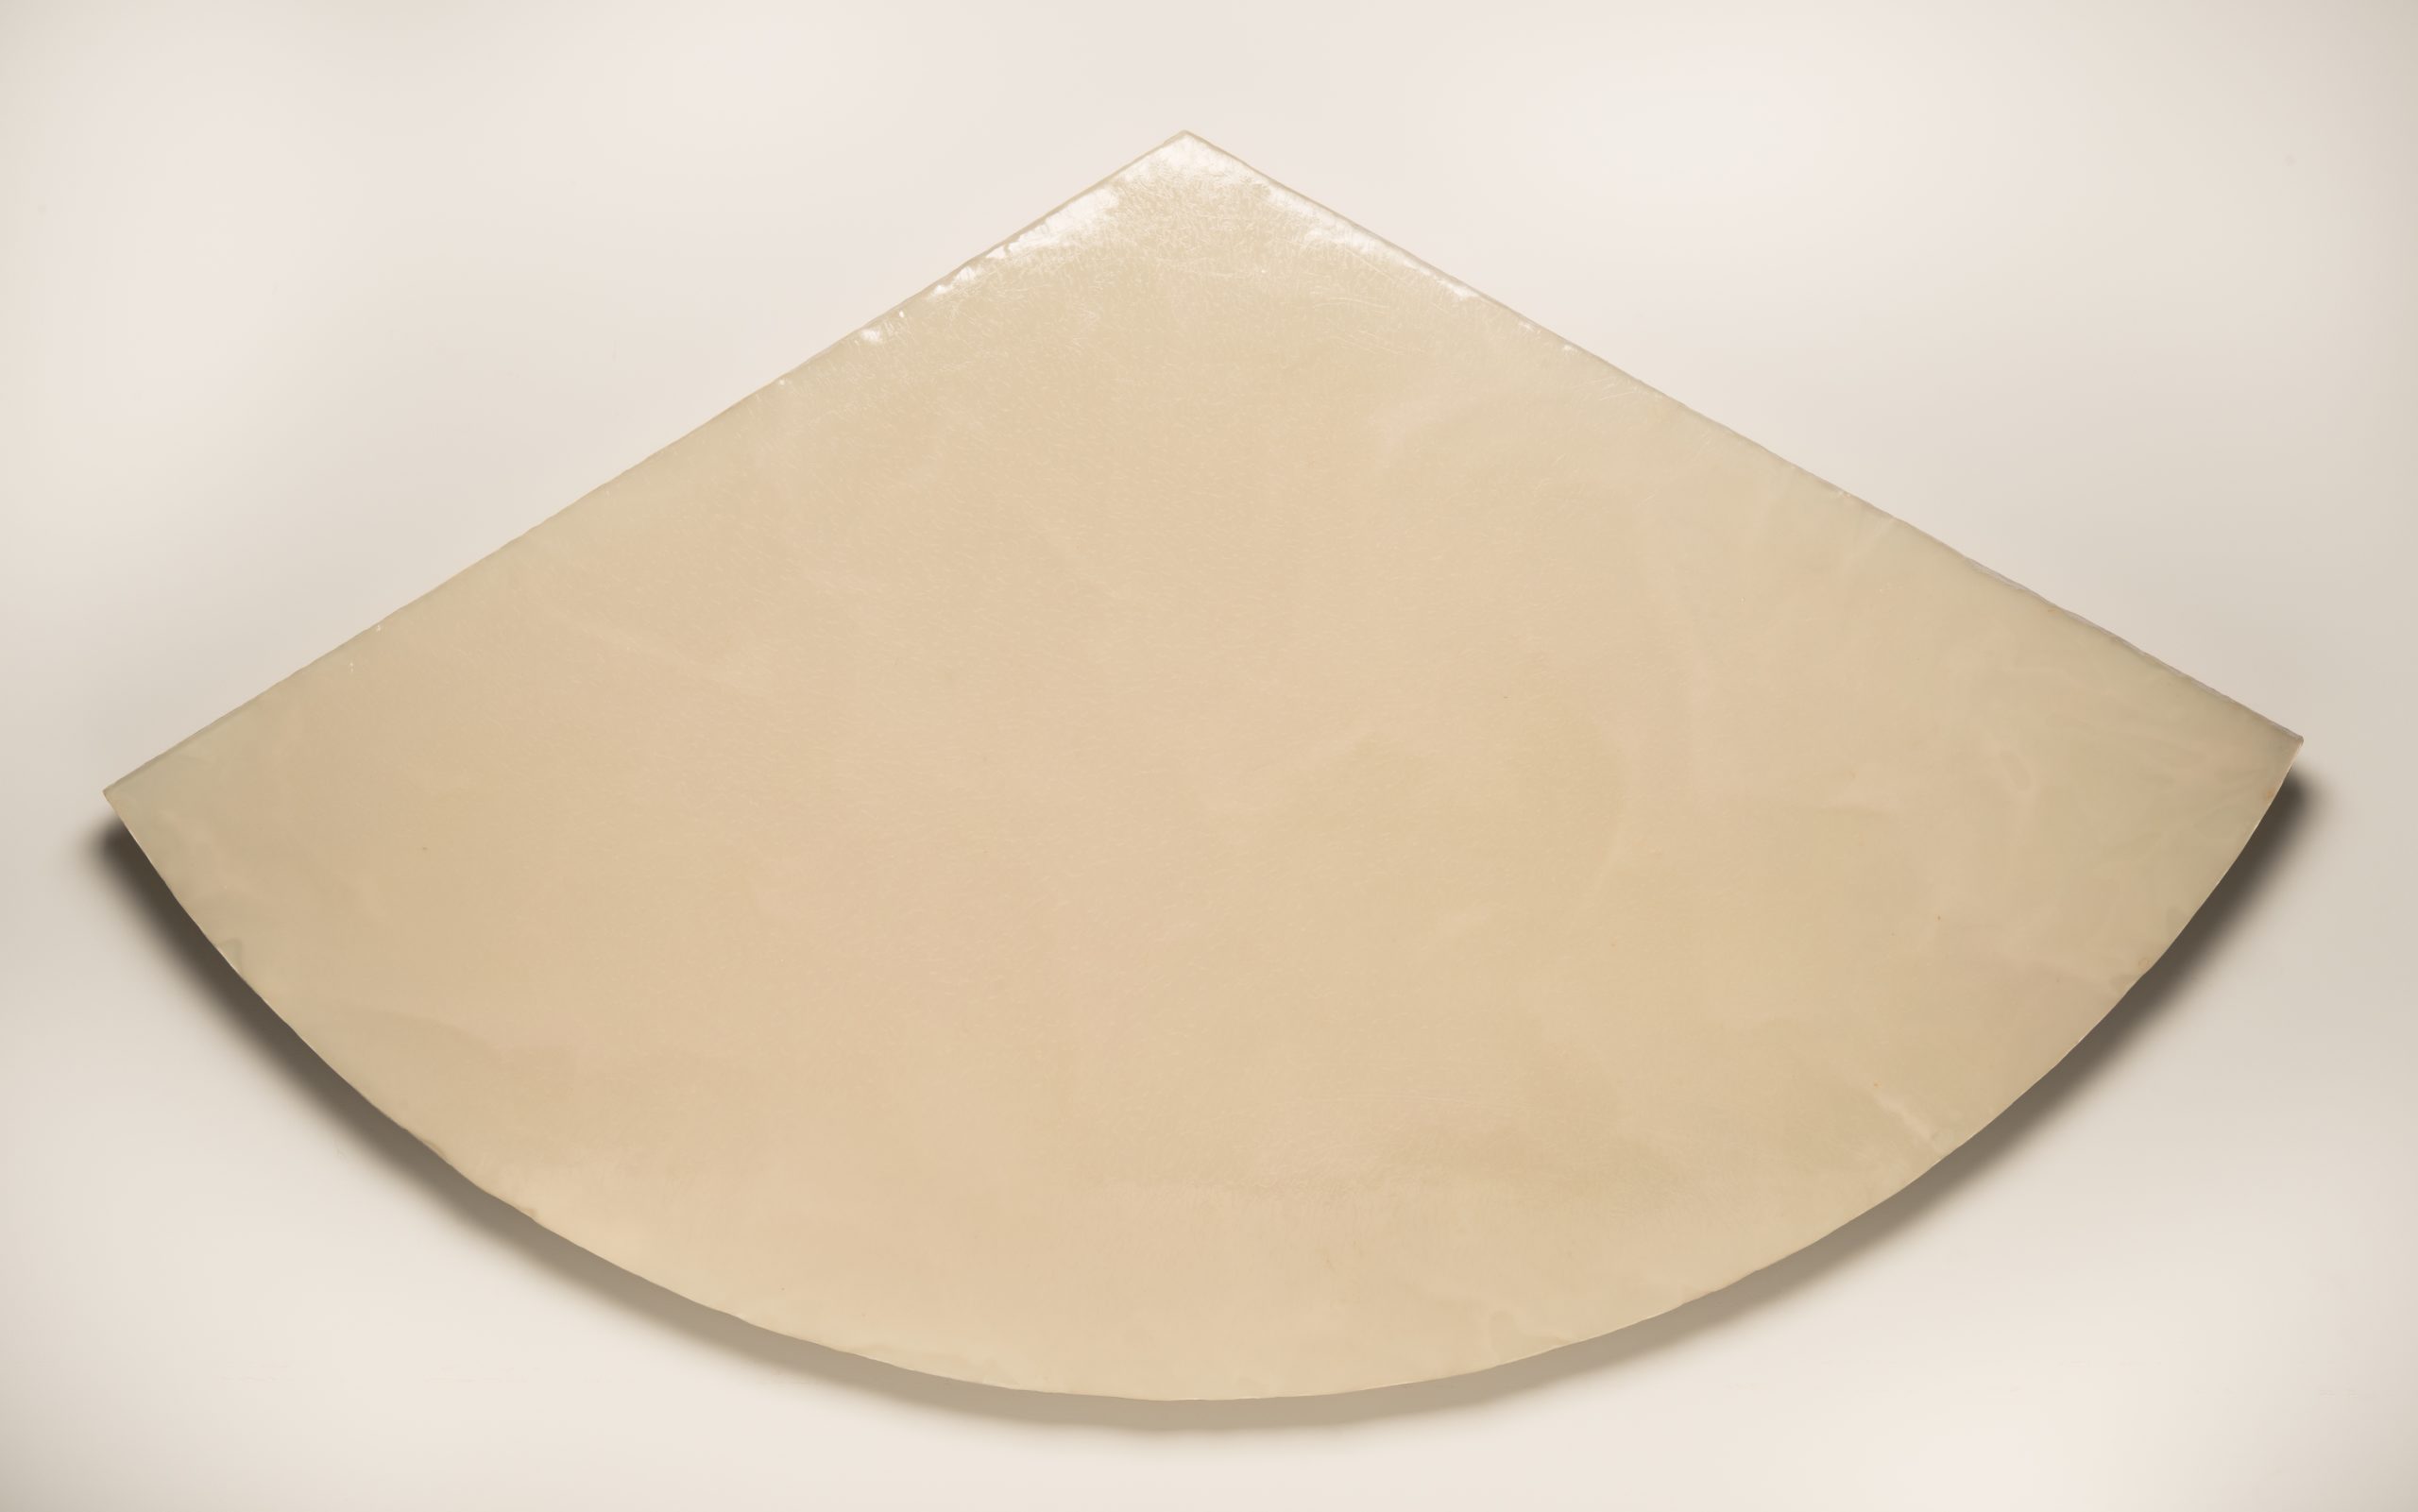 
		                					Florence Miller Pierce		                																	
																											<i>Untitled 1989,</i>  
																																								1989, 
																																								resin relief, 
																																								42 x 72 x 2 inches 
																								
		                				